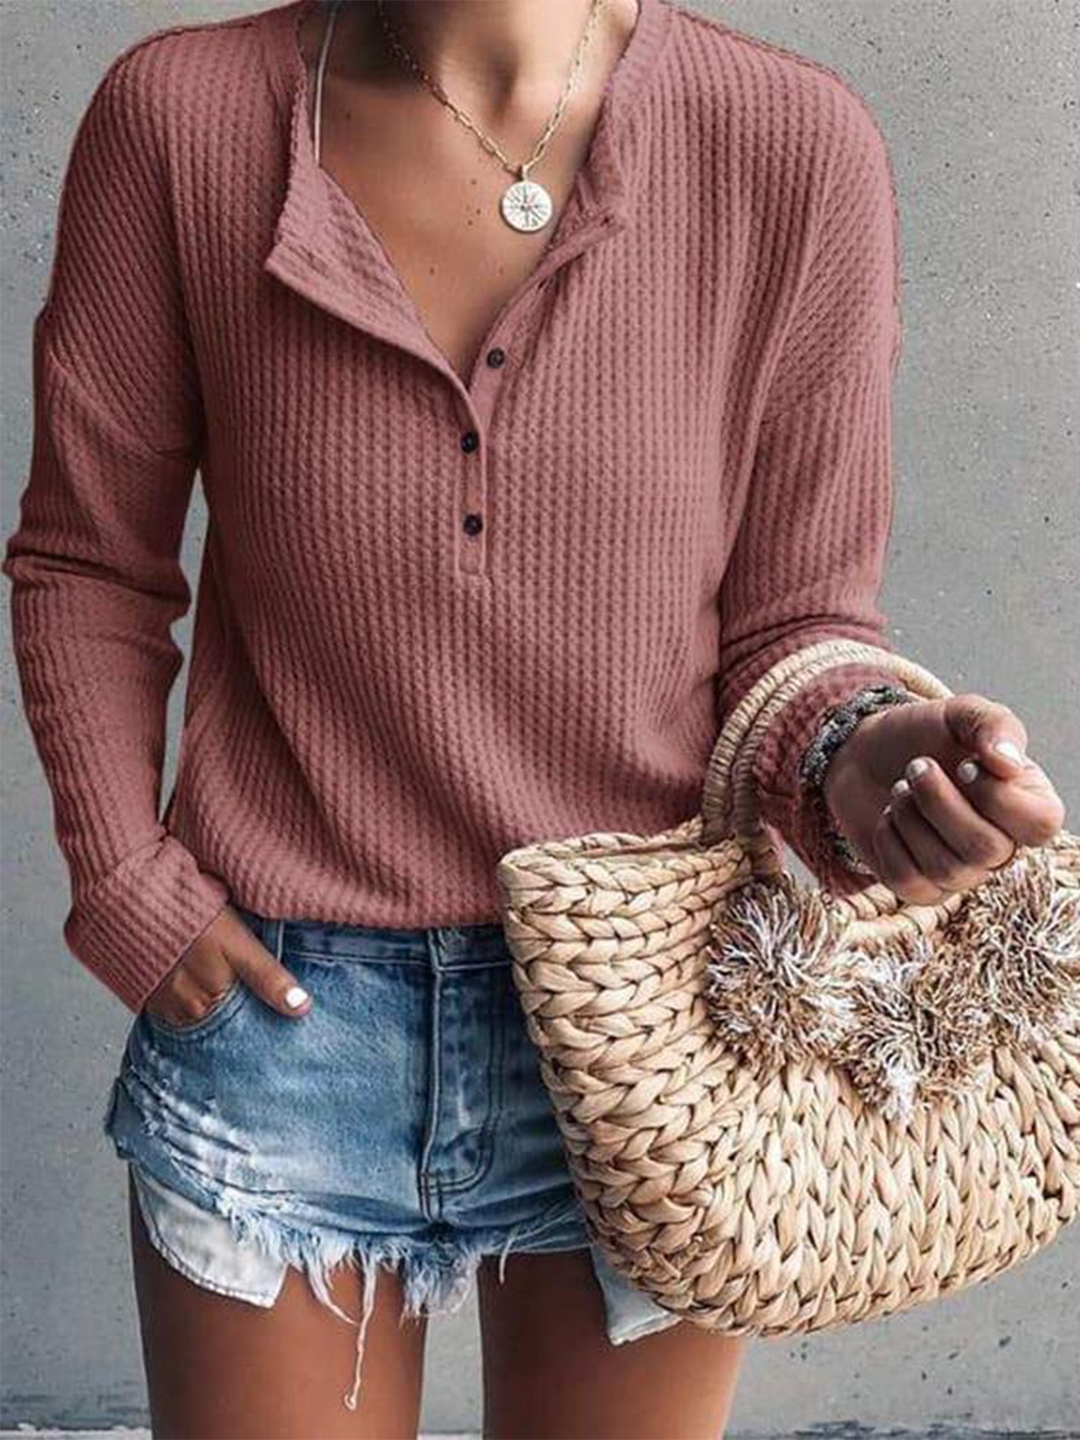 Women Waffle Knit Tunic Tops Long Sleeve Button Pullover Shirts Tee